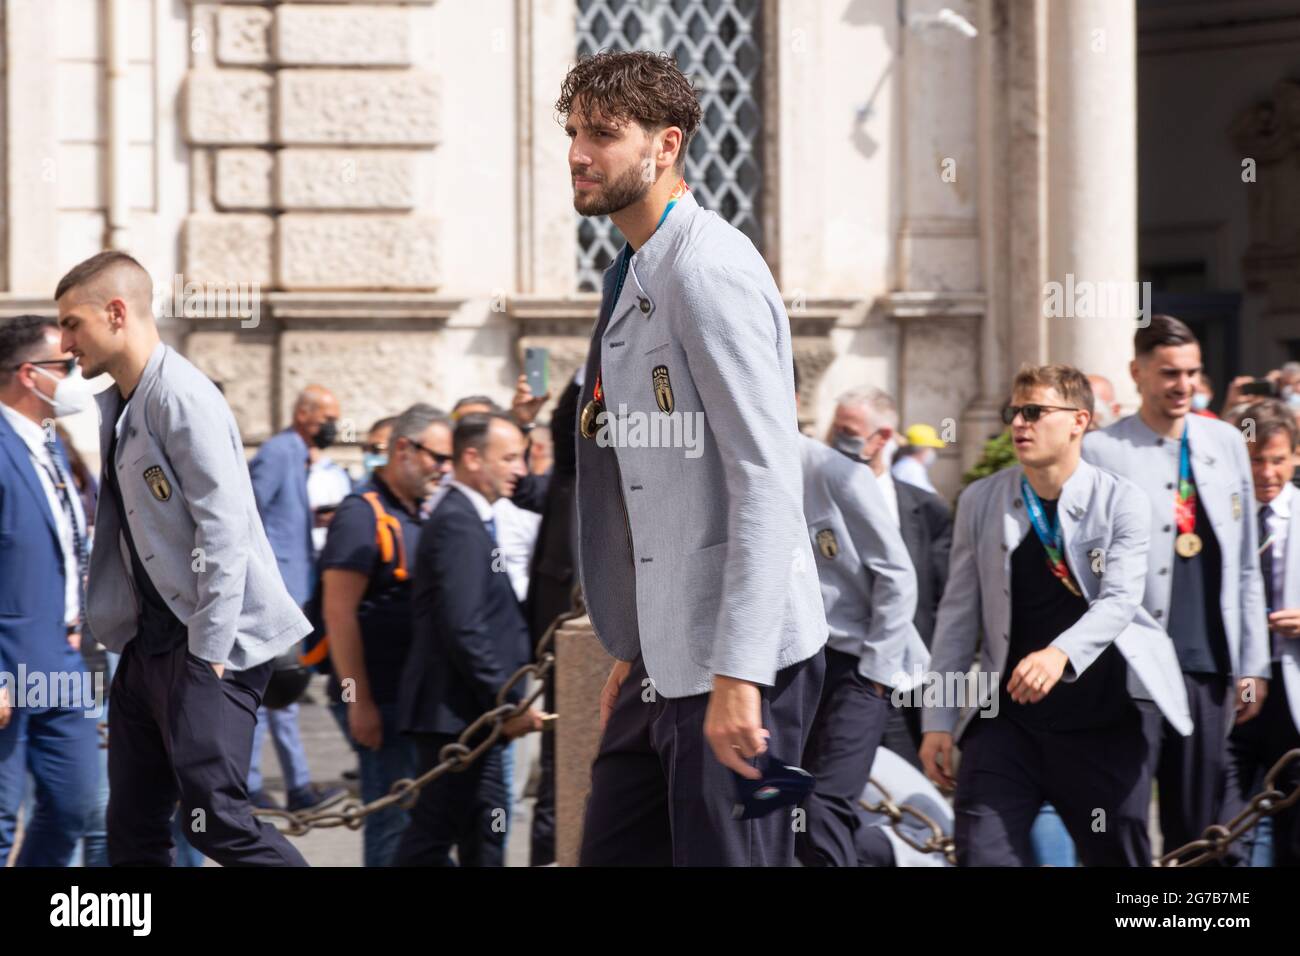 Rome, Italy. 12th July, 2021. Manuel Locatellithe player of the Italian National Football Team enter the Quirinal Palace in Rome to visit the President of the Republic Sergio Mattarella after the victory of the European Football Championships, raising the cup won to the sky. The Italian tennis player Matteo Berrettini, finalist at the Wimbledon tournament, also attended the ceremony (Photo by Matteo Nardone/Pacific Press/Sipa USA) Credit: Sipa USA/Alamy Live News Stock Photo